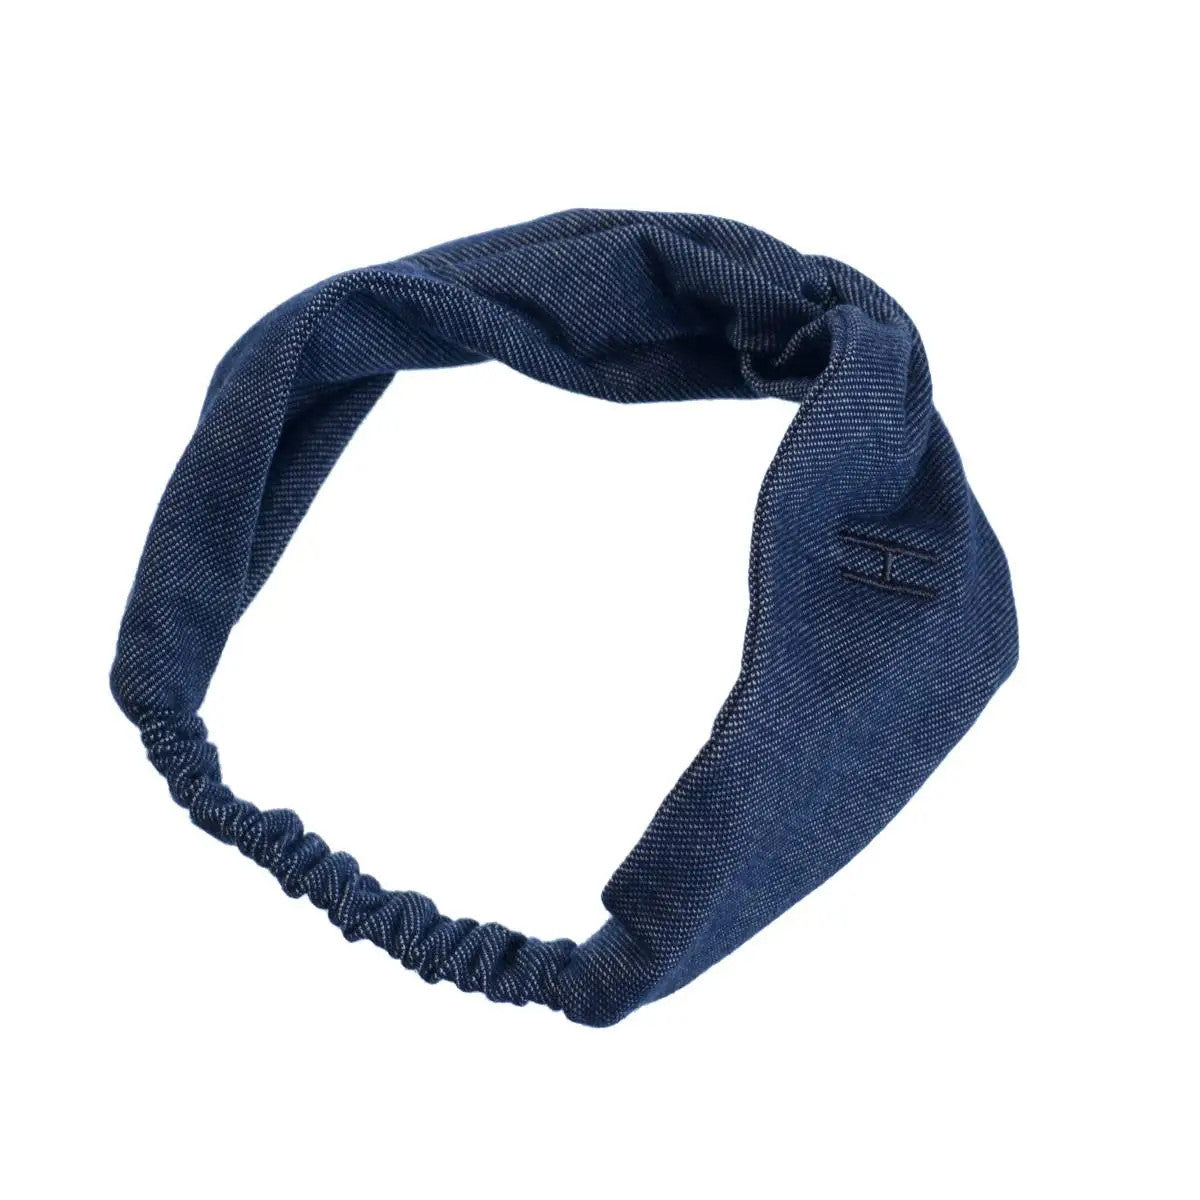 Little Hedonist one-size-fits-all head band, made of organic cotton, in Dark Denim